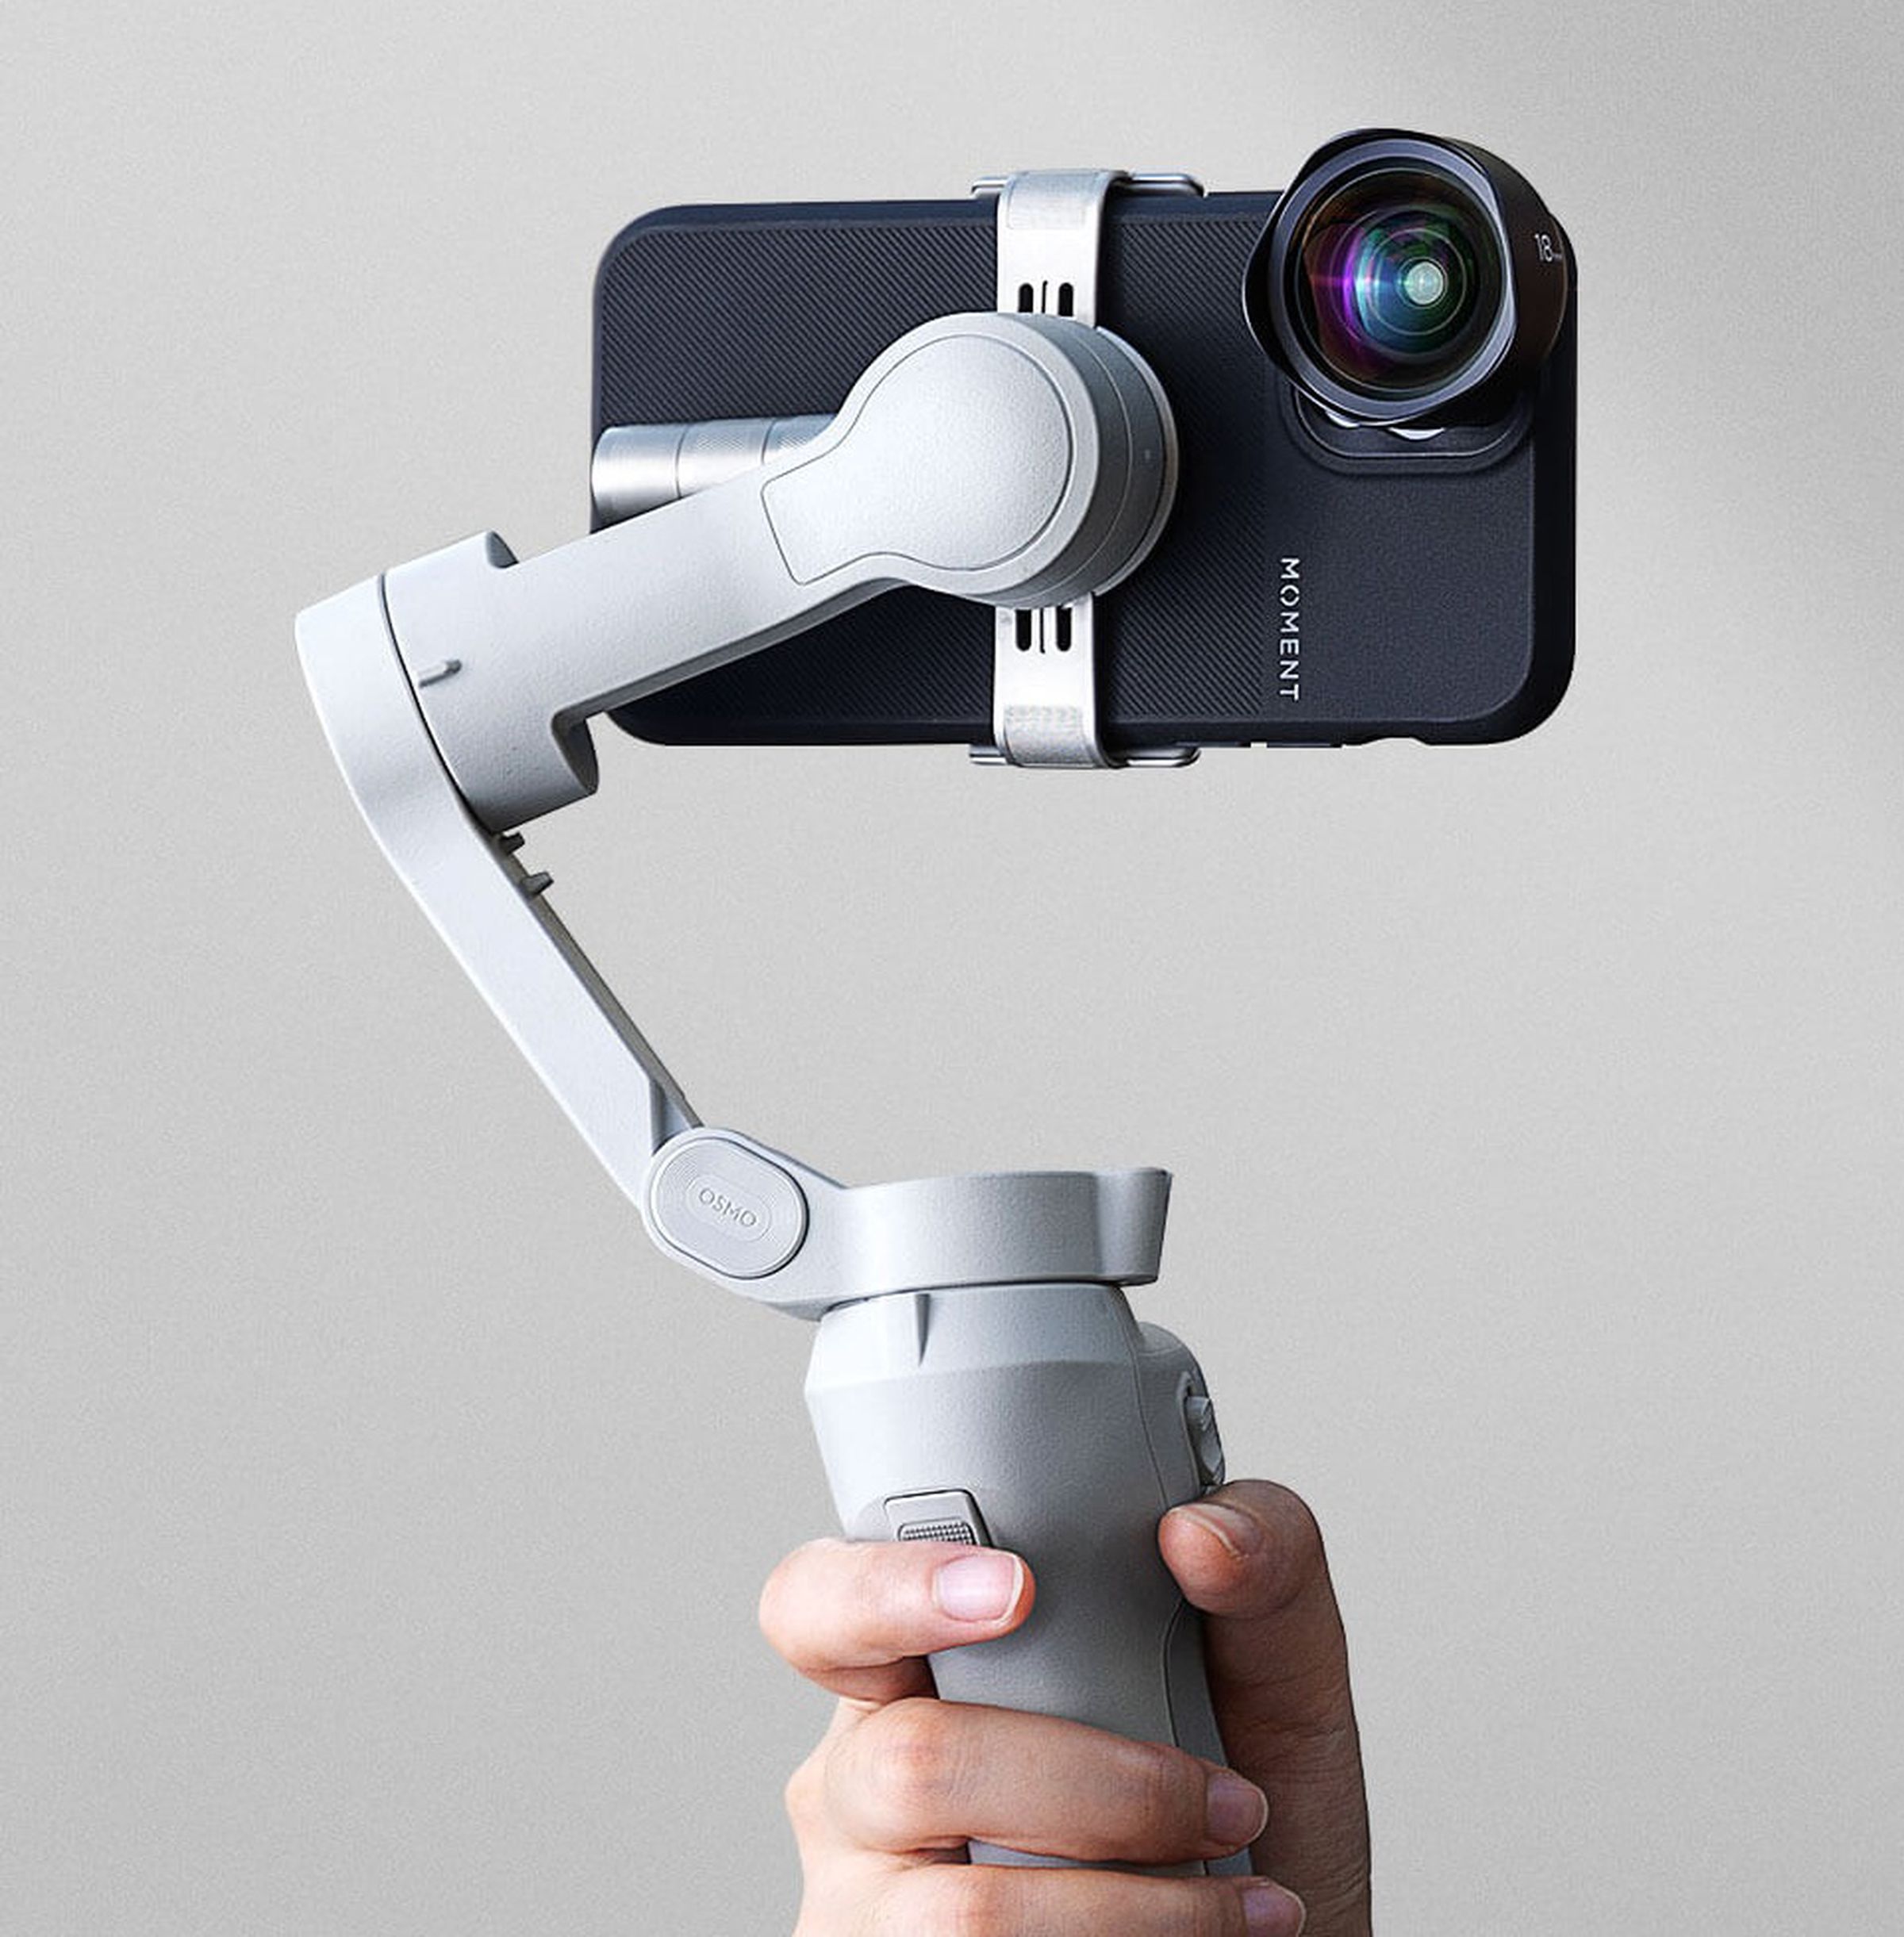 The DJI Osmo Mobile 4 and a Moment case and lens.